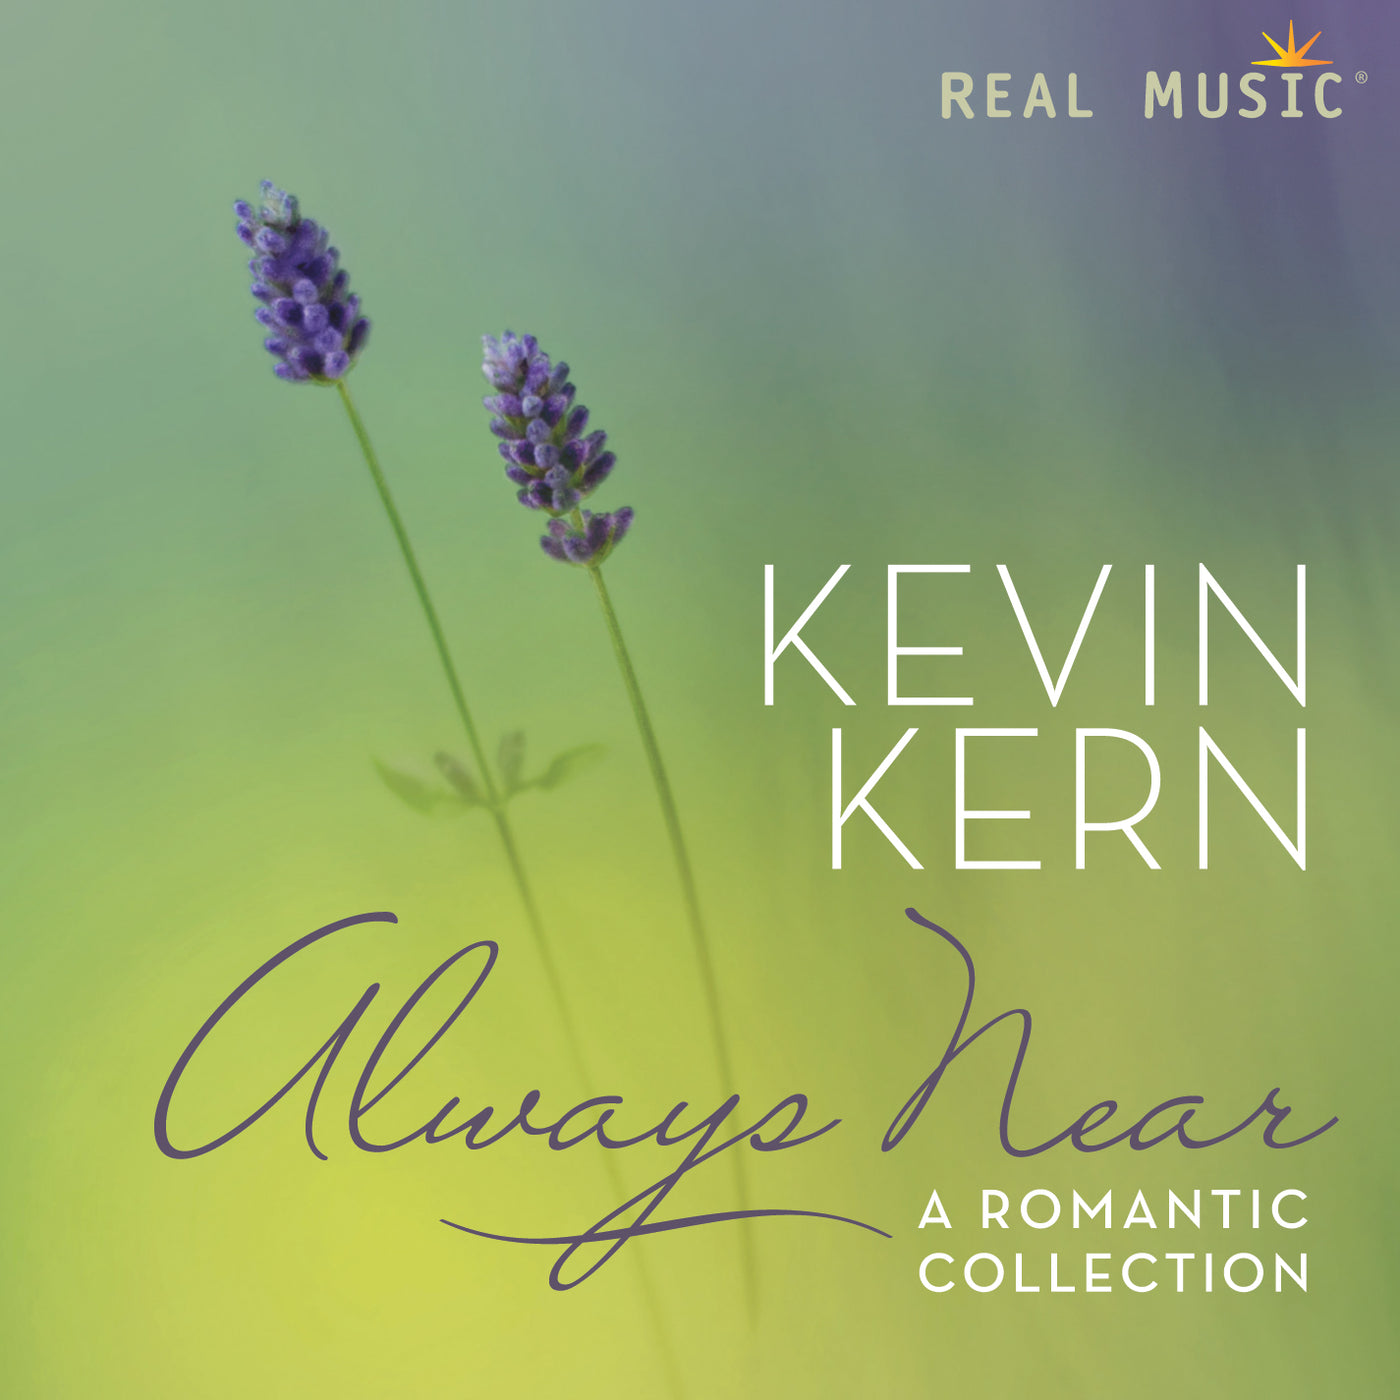 Always Near by Kevin Kern, cd cover art.